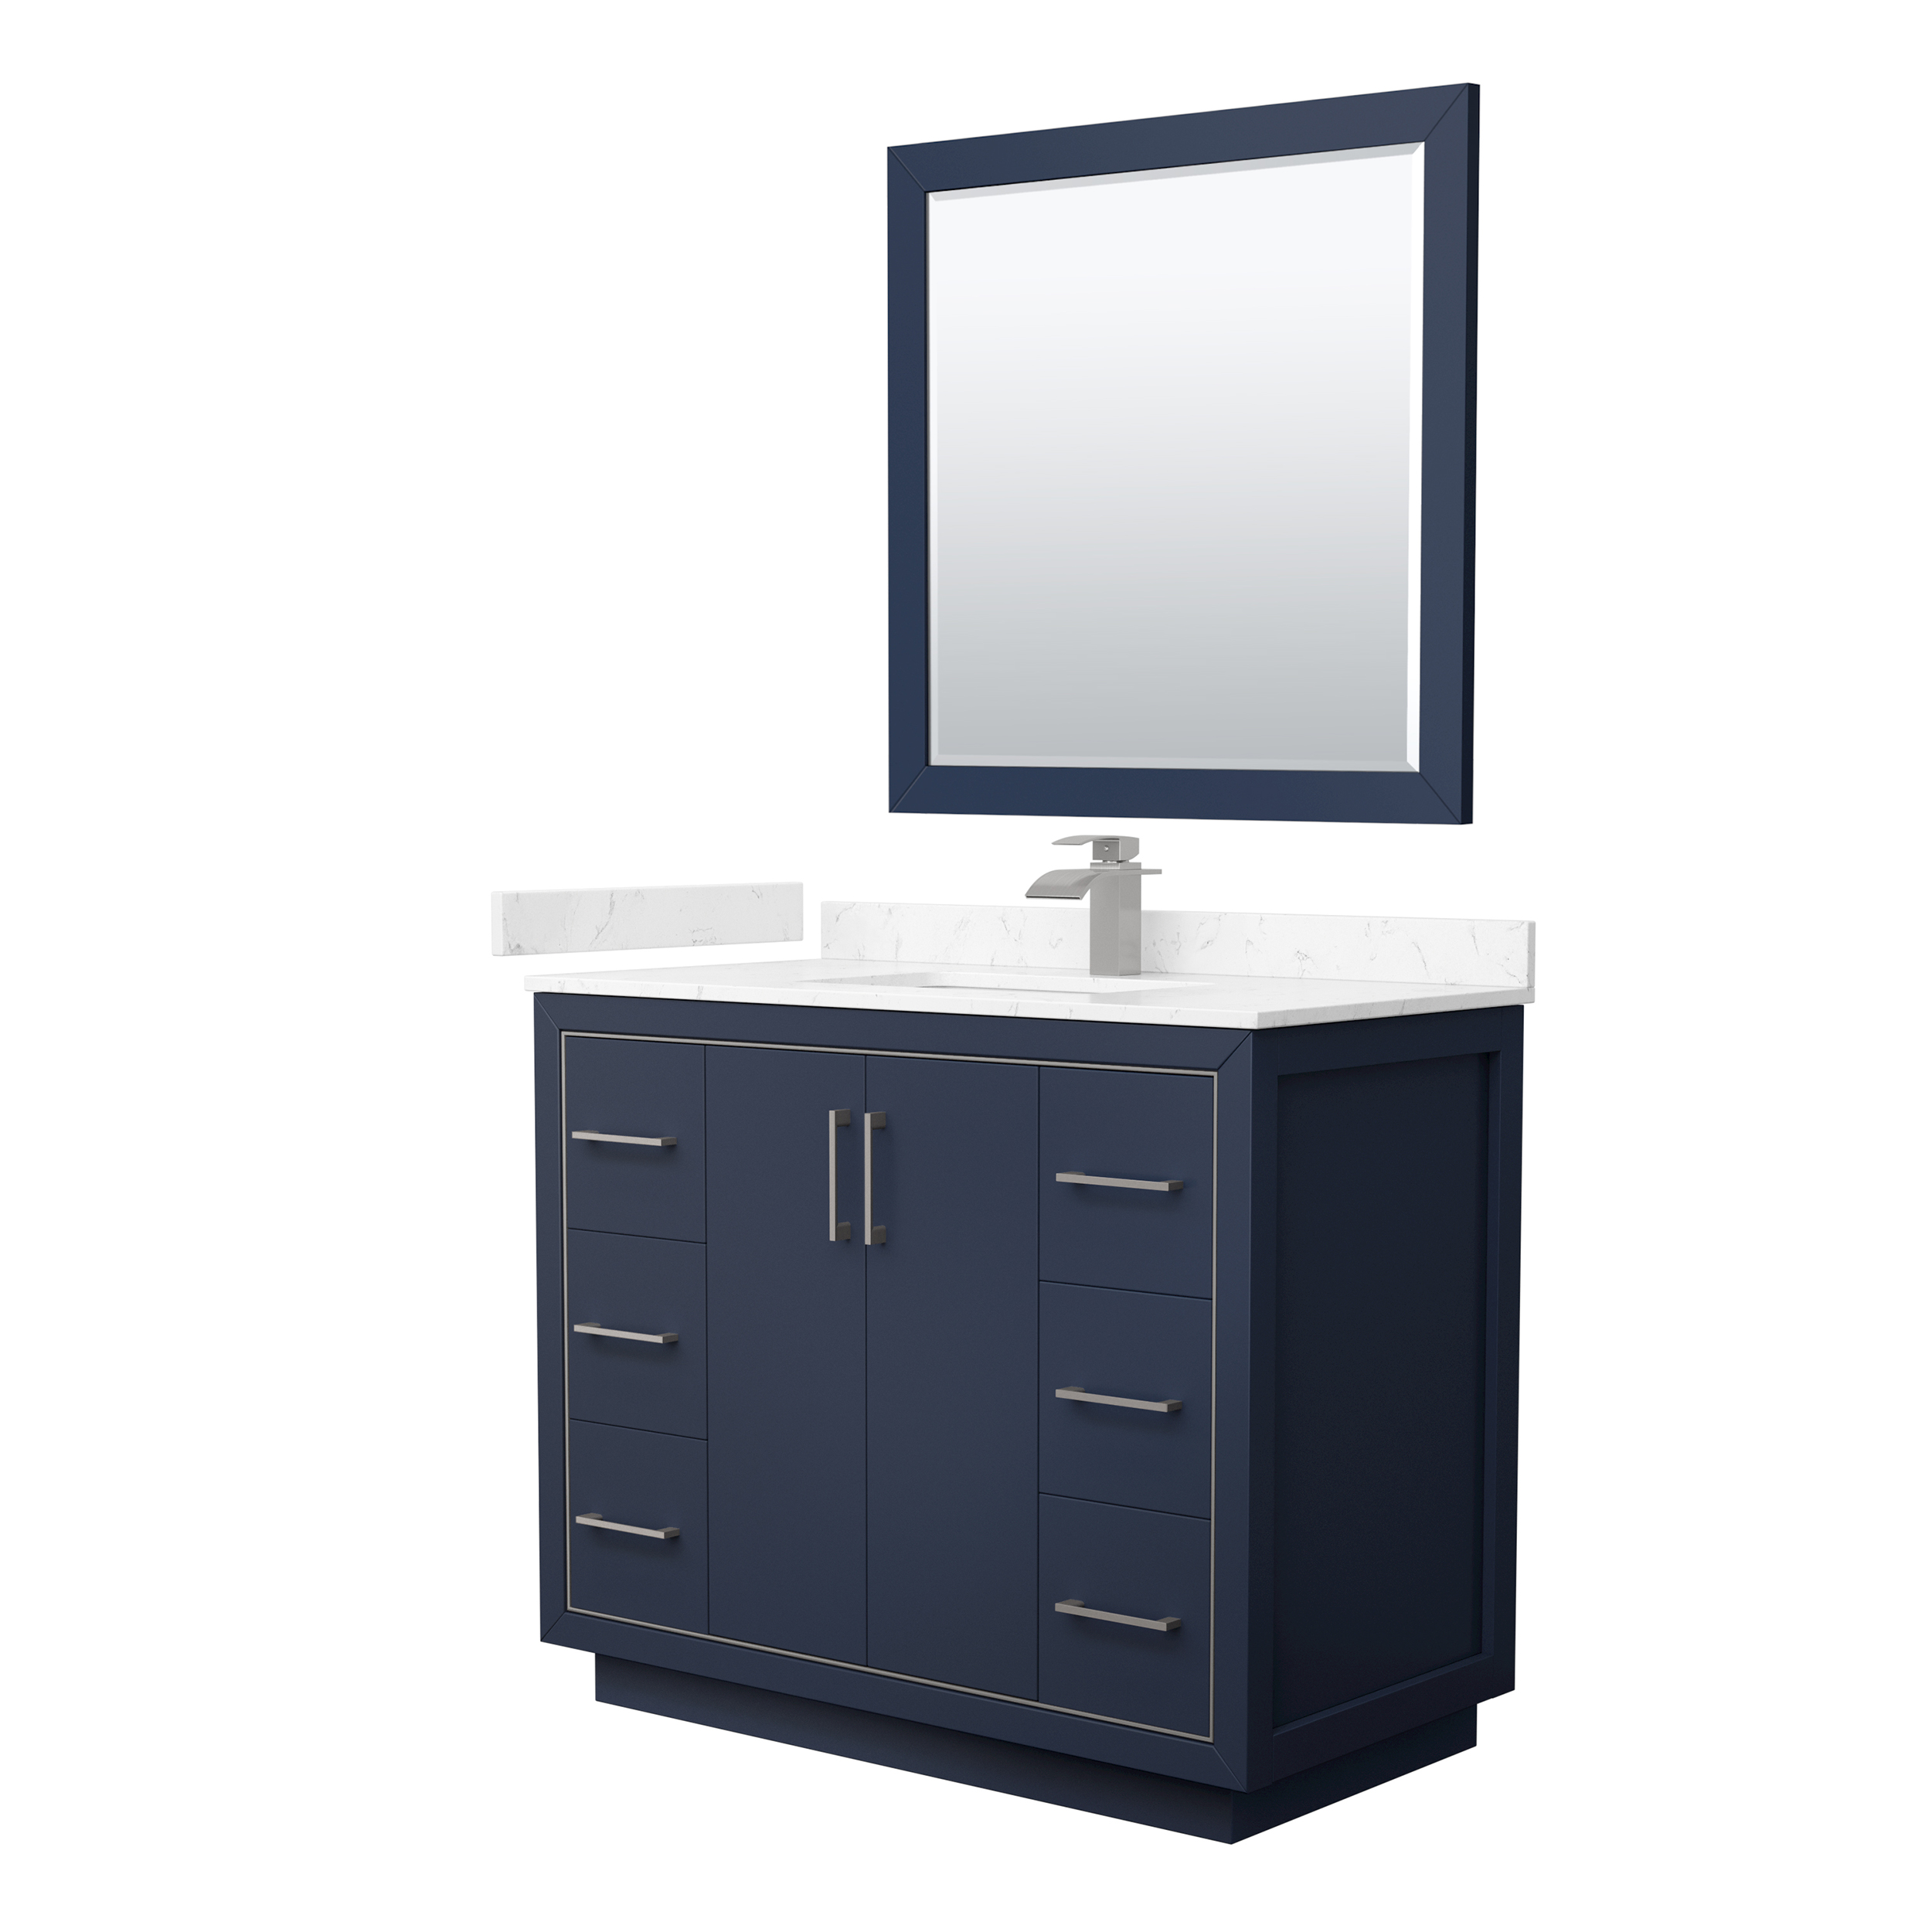 42" Single Bathroom Vanity with 4 Color Options, 3 Countertop Options, 3 Hardware Options and Mirror Option